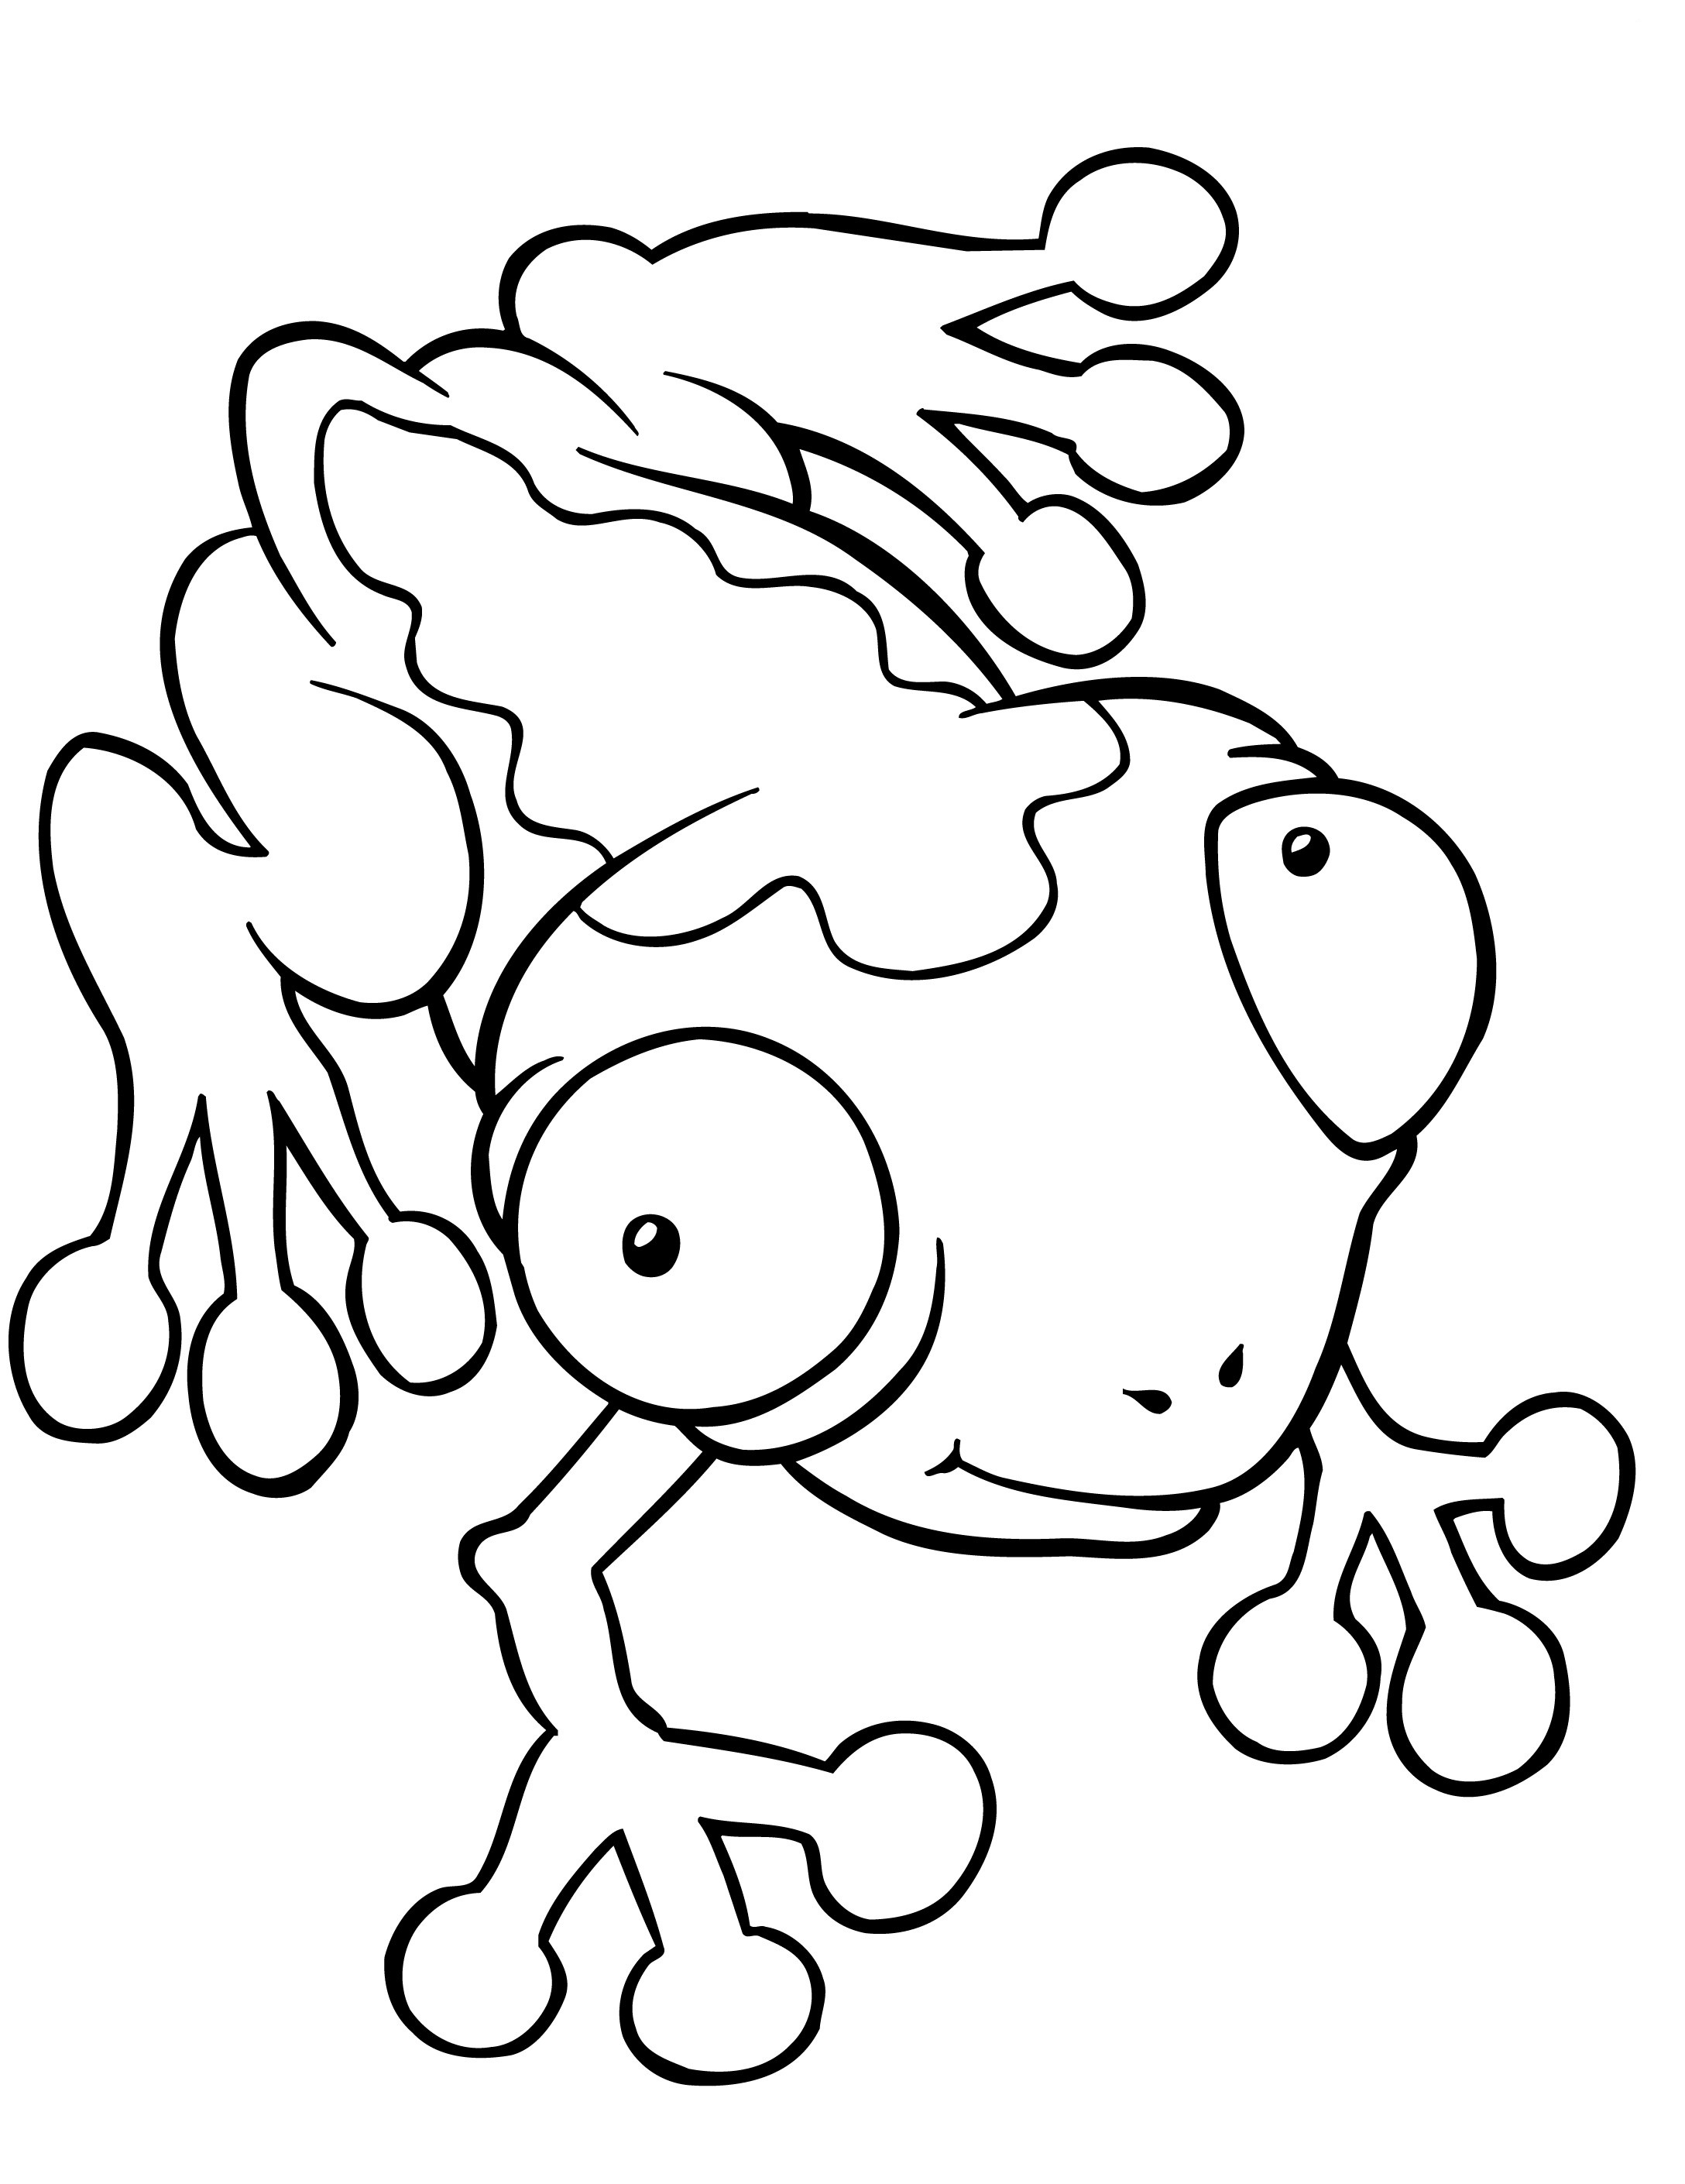 Cute Frog Coloring Pages images